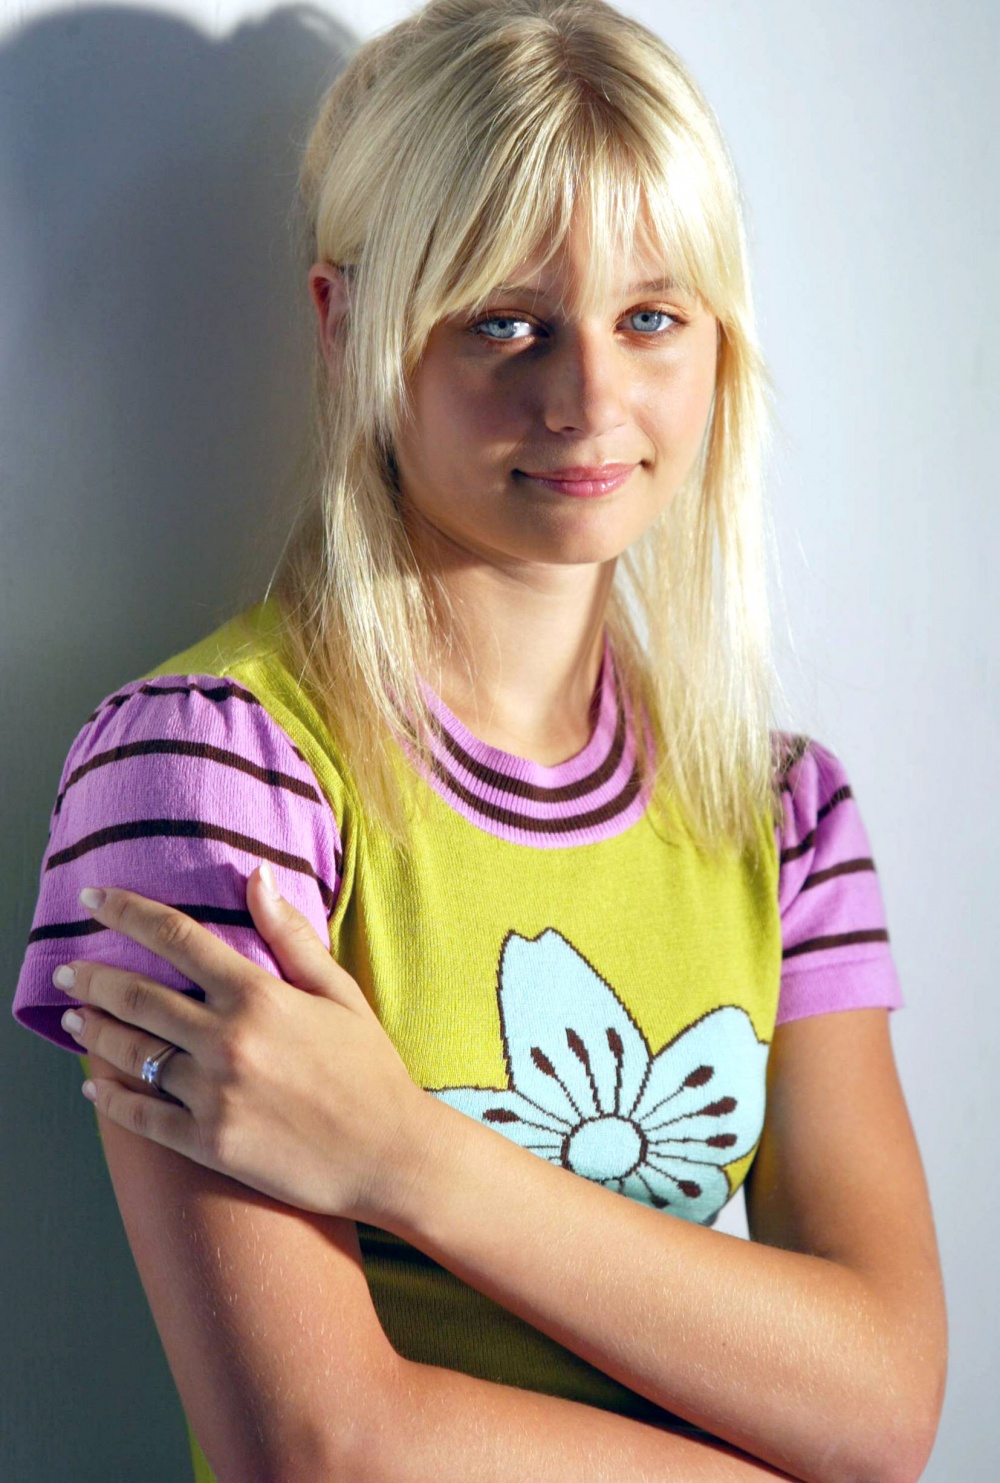 General photo of Carly Schroeder